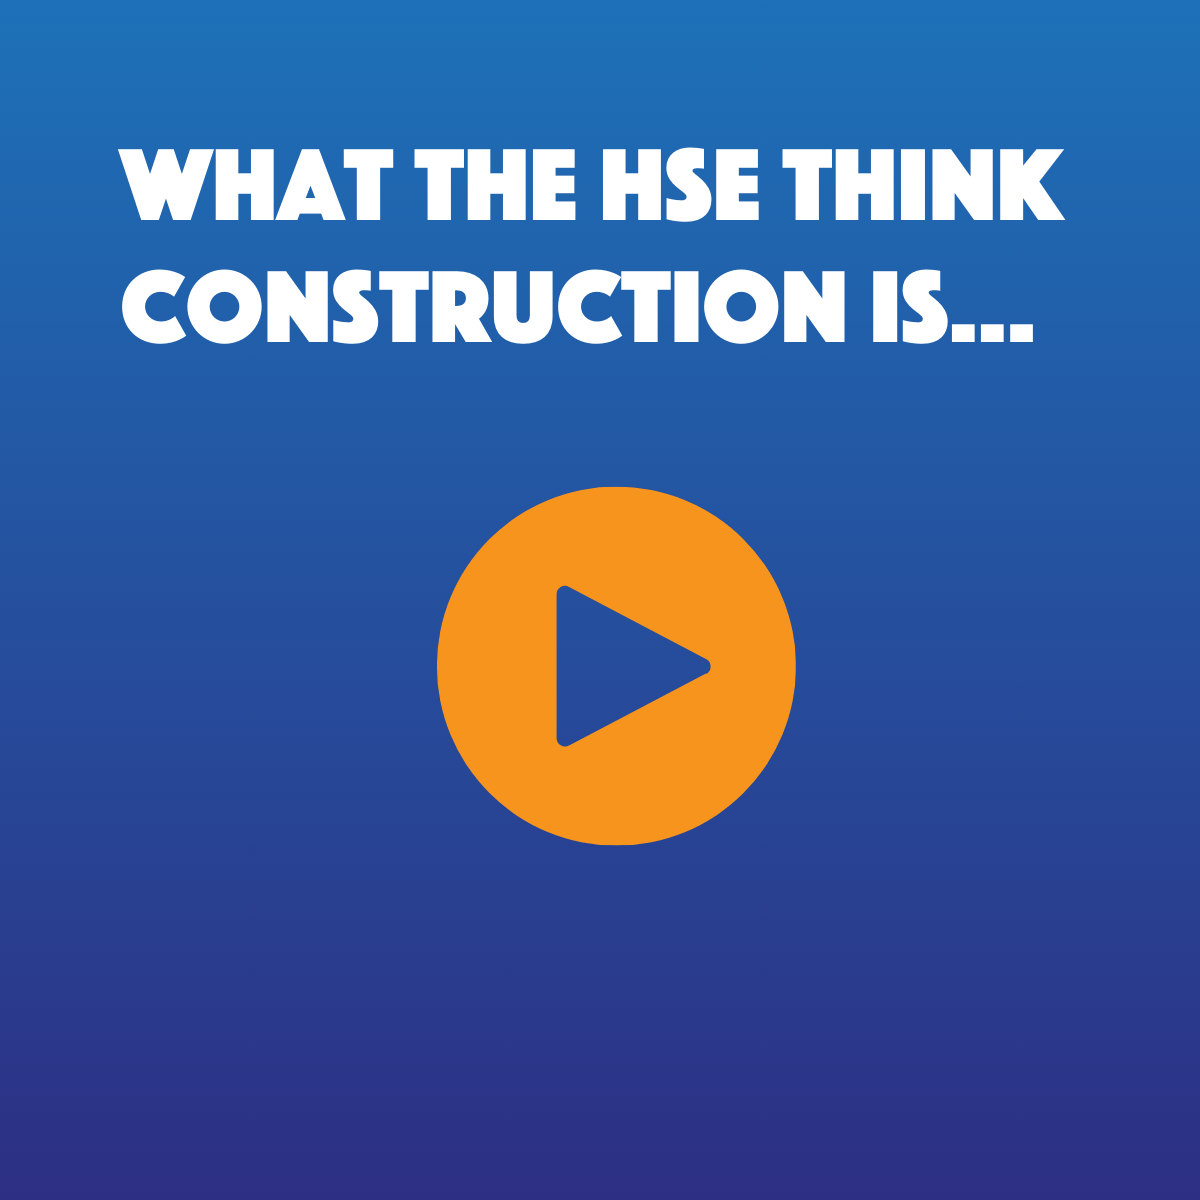 Informative Video which shows the difference between what the public think Construction is and what HSE think construction is